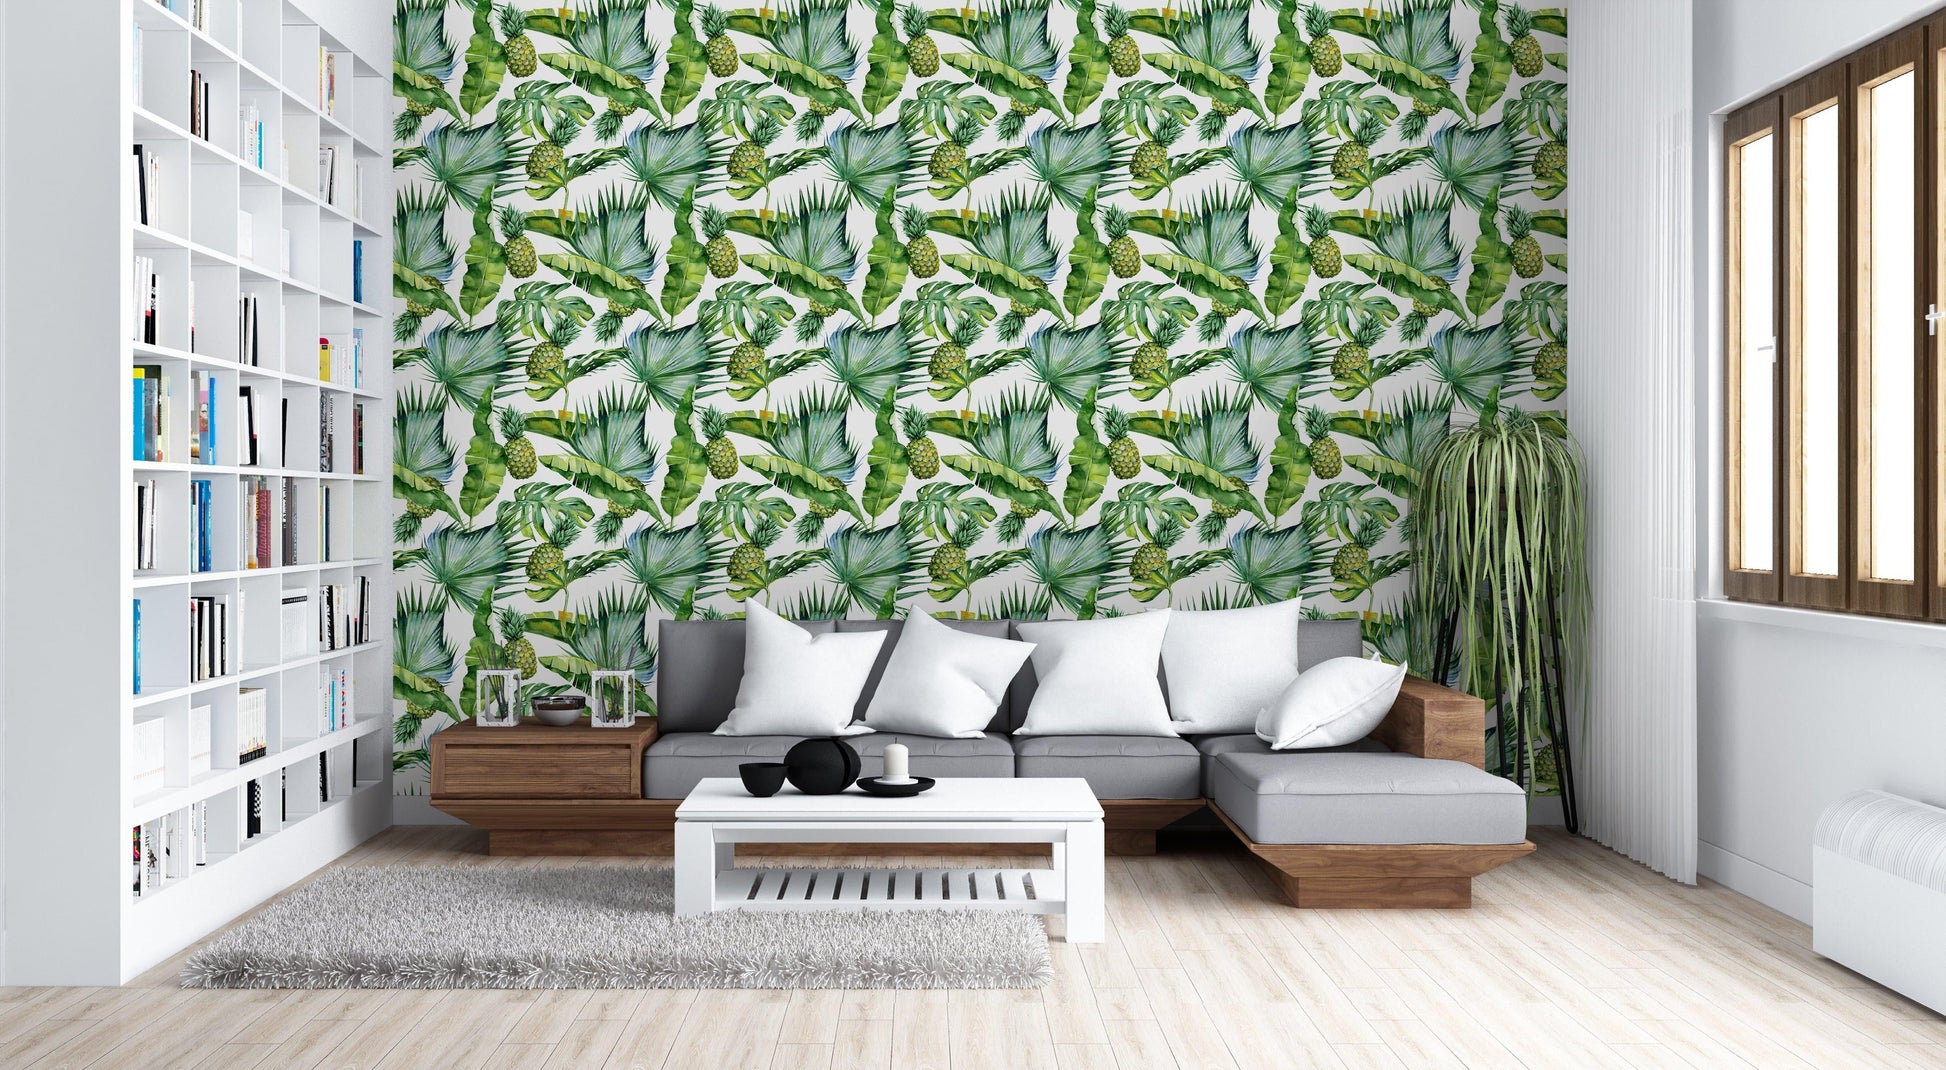 Watercolor Tropical Green Palm Leaves Removable Wallpaper Watercolor Tropical Green Palm Leaves Removable Wallpaper Tropical Palm Leaves and Pineapples Removable Wallpaper 